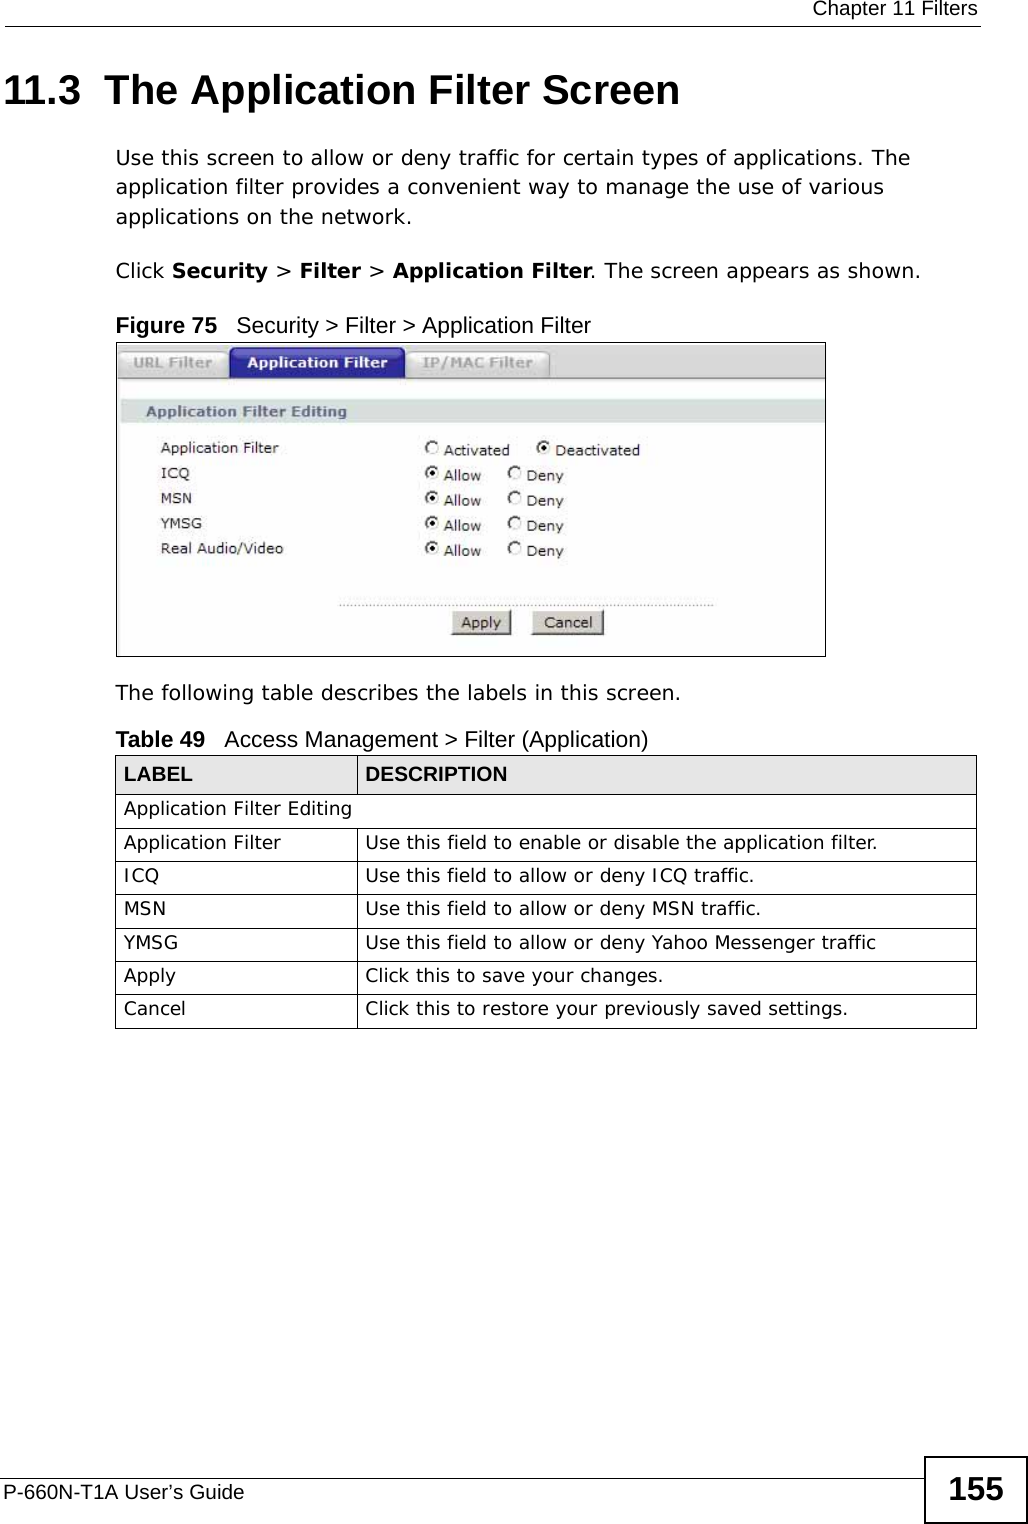  Chapter 11 FiltersP-660N-T1A User’s Guide 15511.3  The Application Filter ScreenUse this screen to allow or deny traffic for certain types of applications. The application filter provides a convenient way to manage the use of various applications on the network.Click Security &gt; Filter &gt; Application Filter. The screen appears as shown.Figure 75   Security &gt; Filter &gt; Application FilterThe following table describes the labels in this screen. Table 49   Access Management &gt; Filter (Application)LABEL DESCRIPTIONApplication Filter EditingApplication Filter Use this field to enable or disable the application filter.ICQ Use this field to allow or deny ICQ traffic.MSN Use this field to allow or deny MSN traffic.YMSG Use this field to allow or deny Yahoo Messenger trafficApply Click this to save your changes.Cancel Click this to restore your previously saved settings.